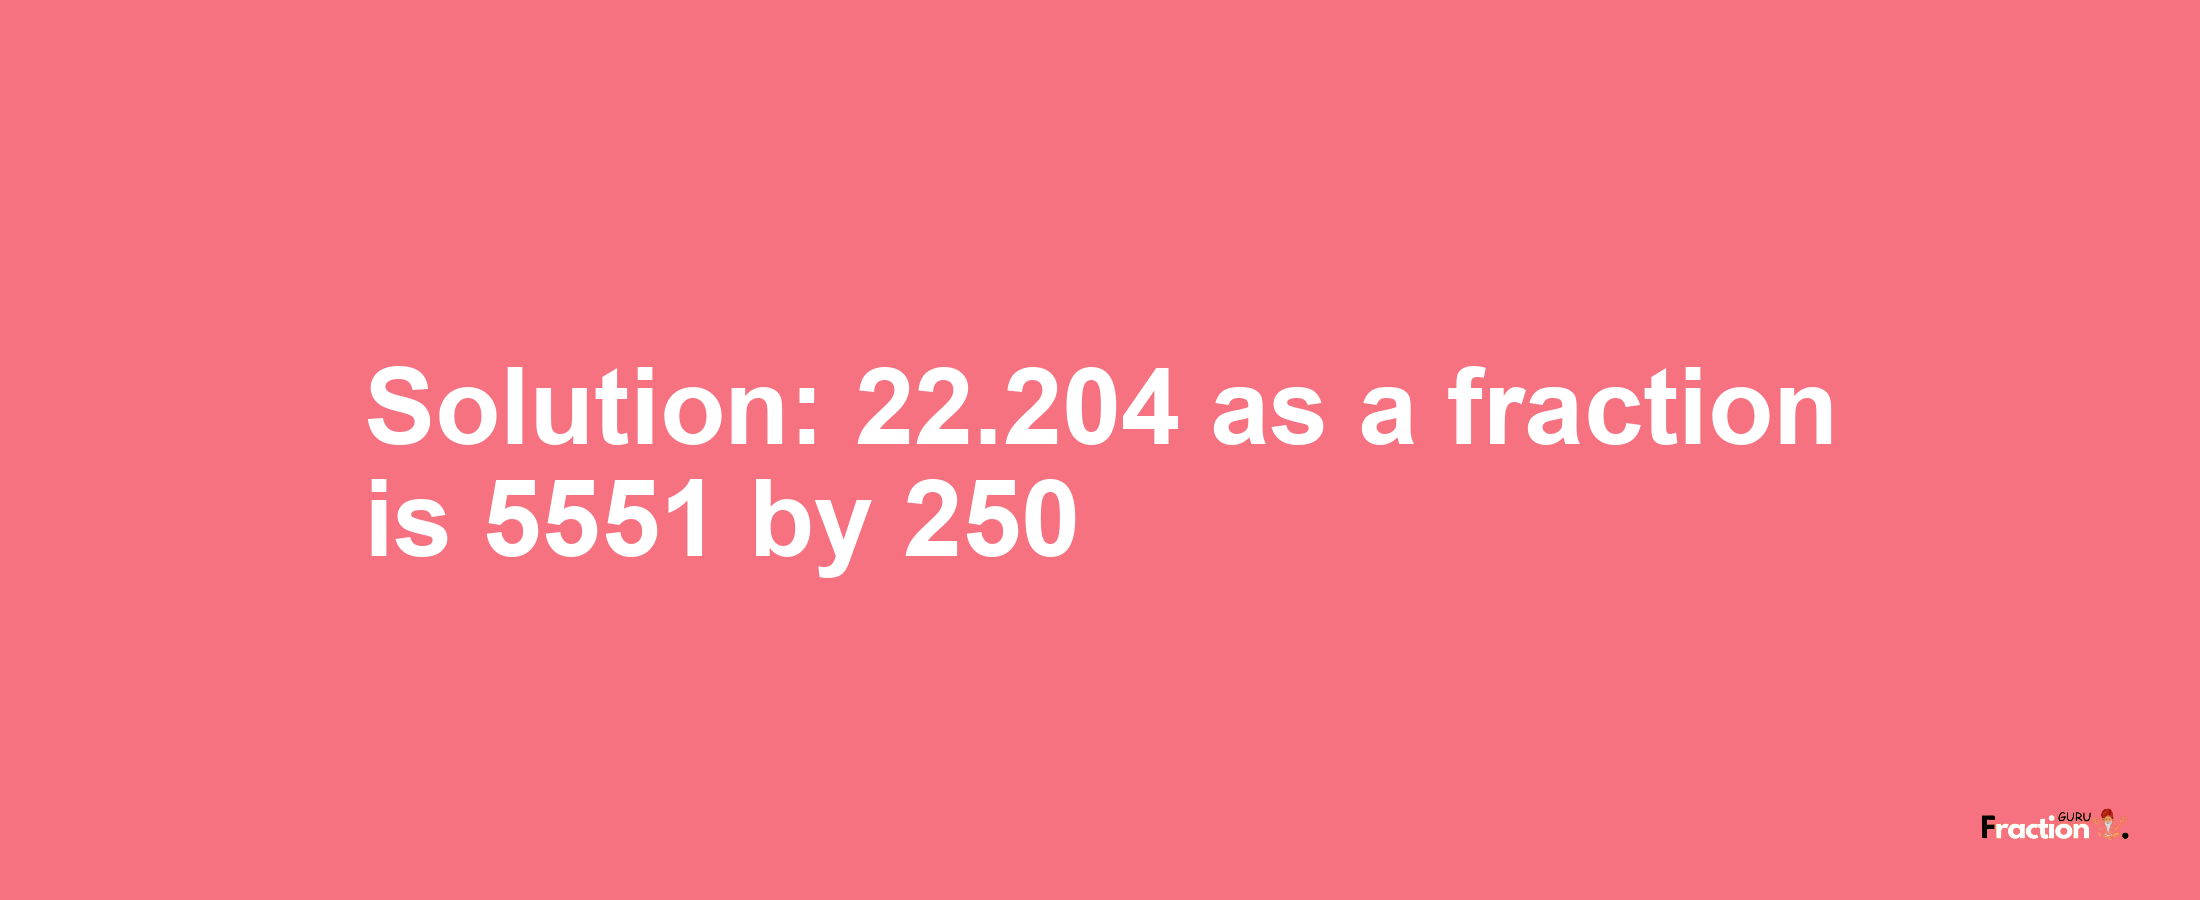 Solution:22.204 as a fraction is 5551/250